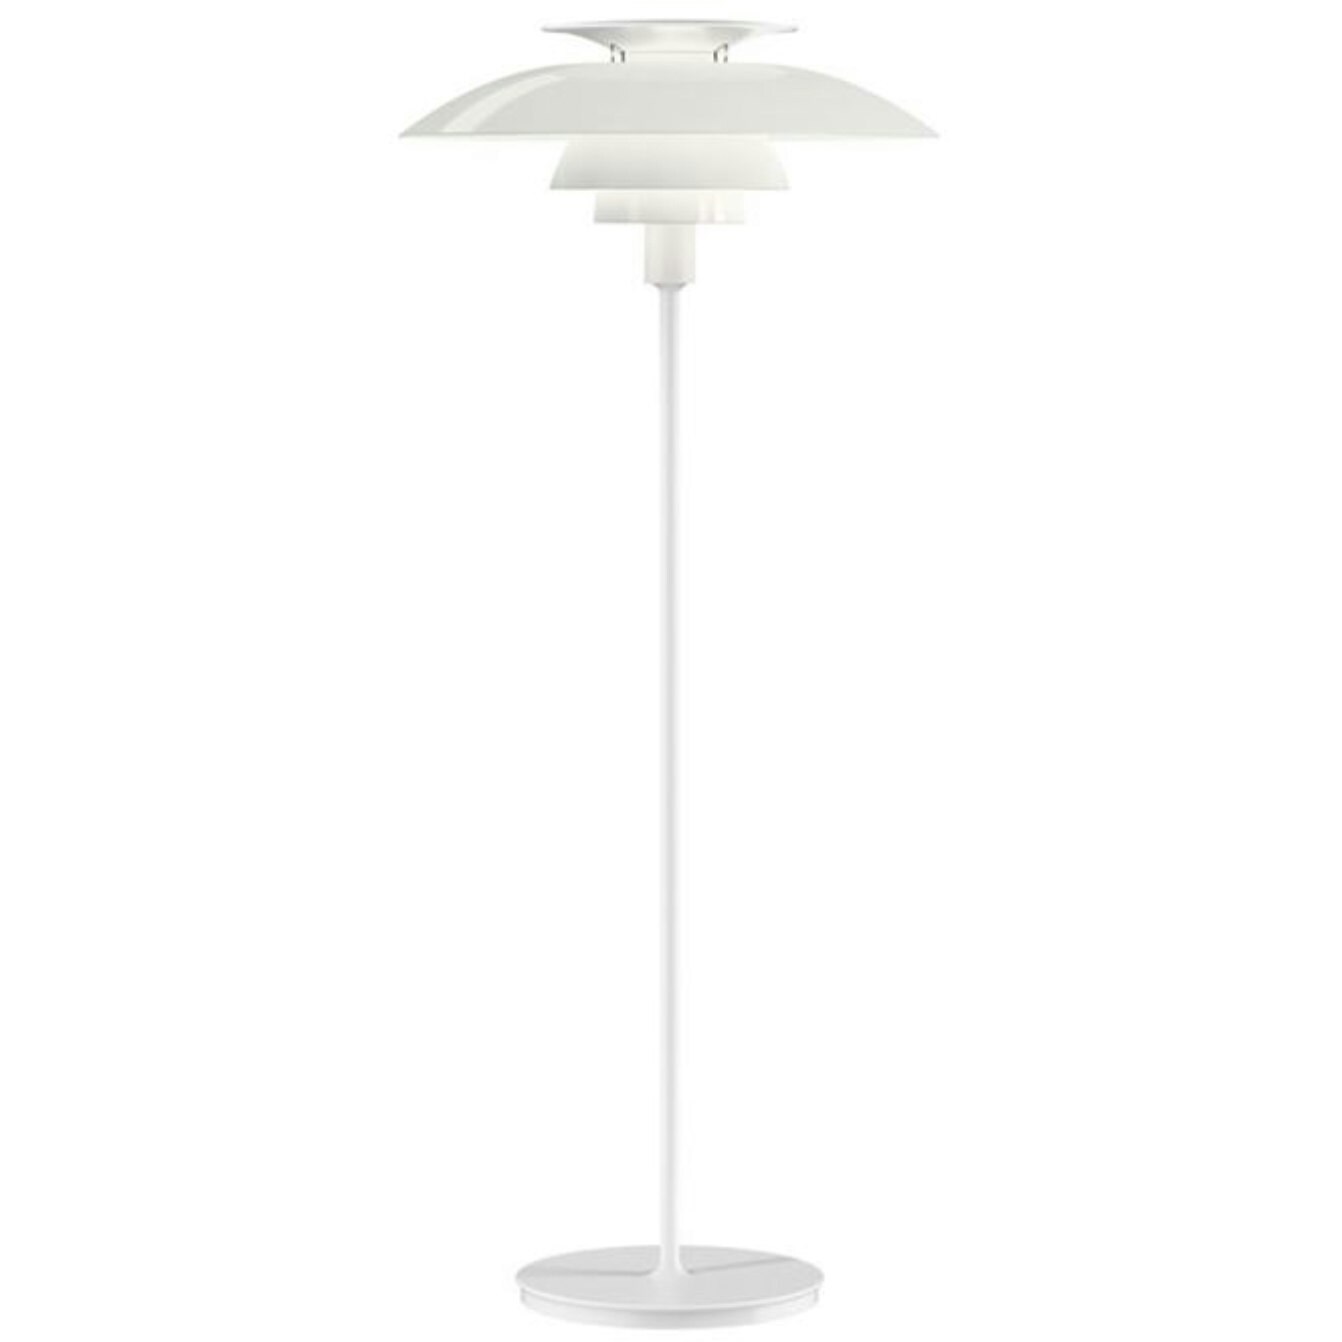 PH 80 Floor Lamp Without Dimmer, White Opal Acrylic / Chrome